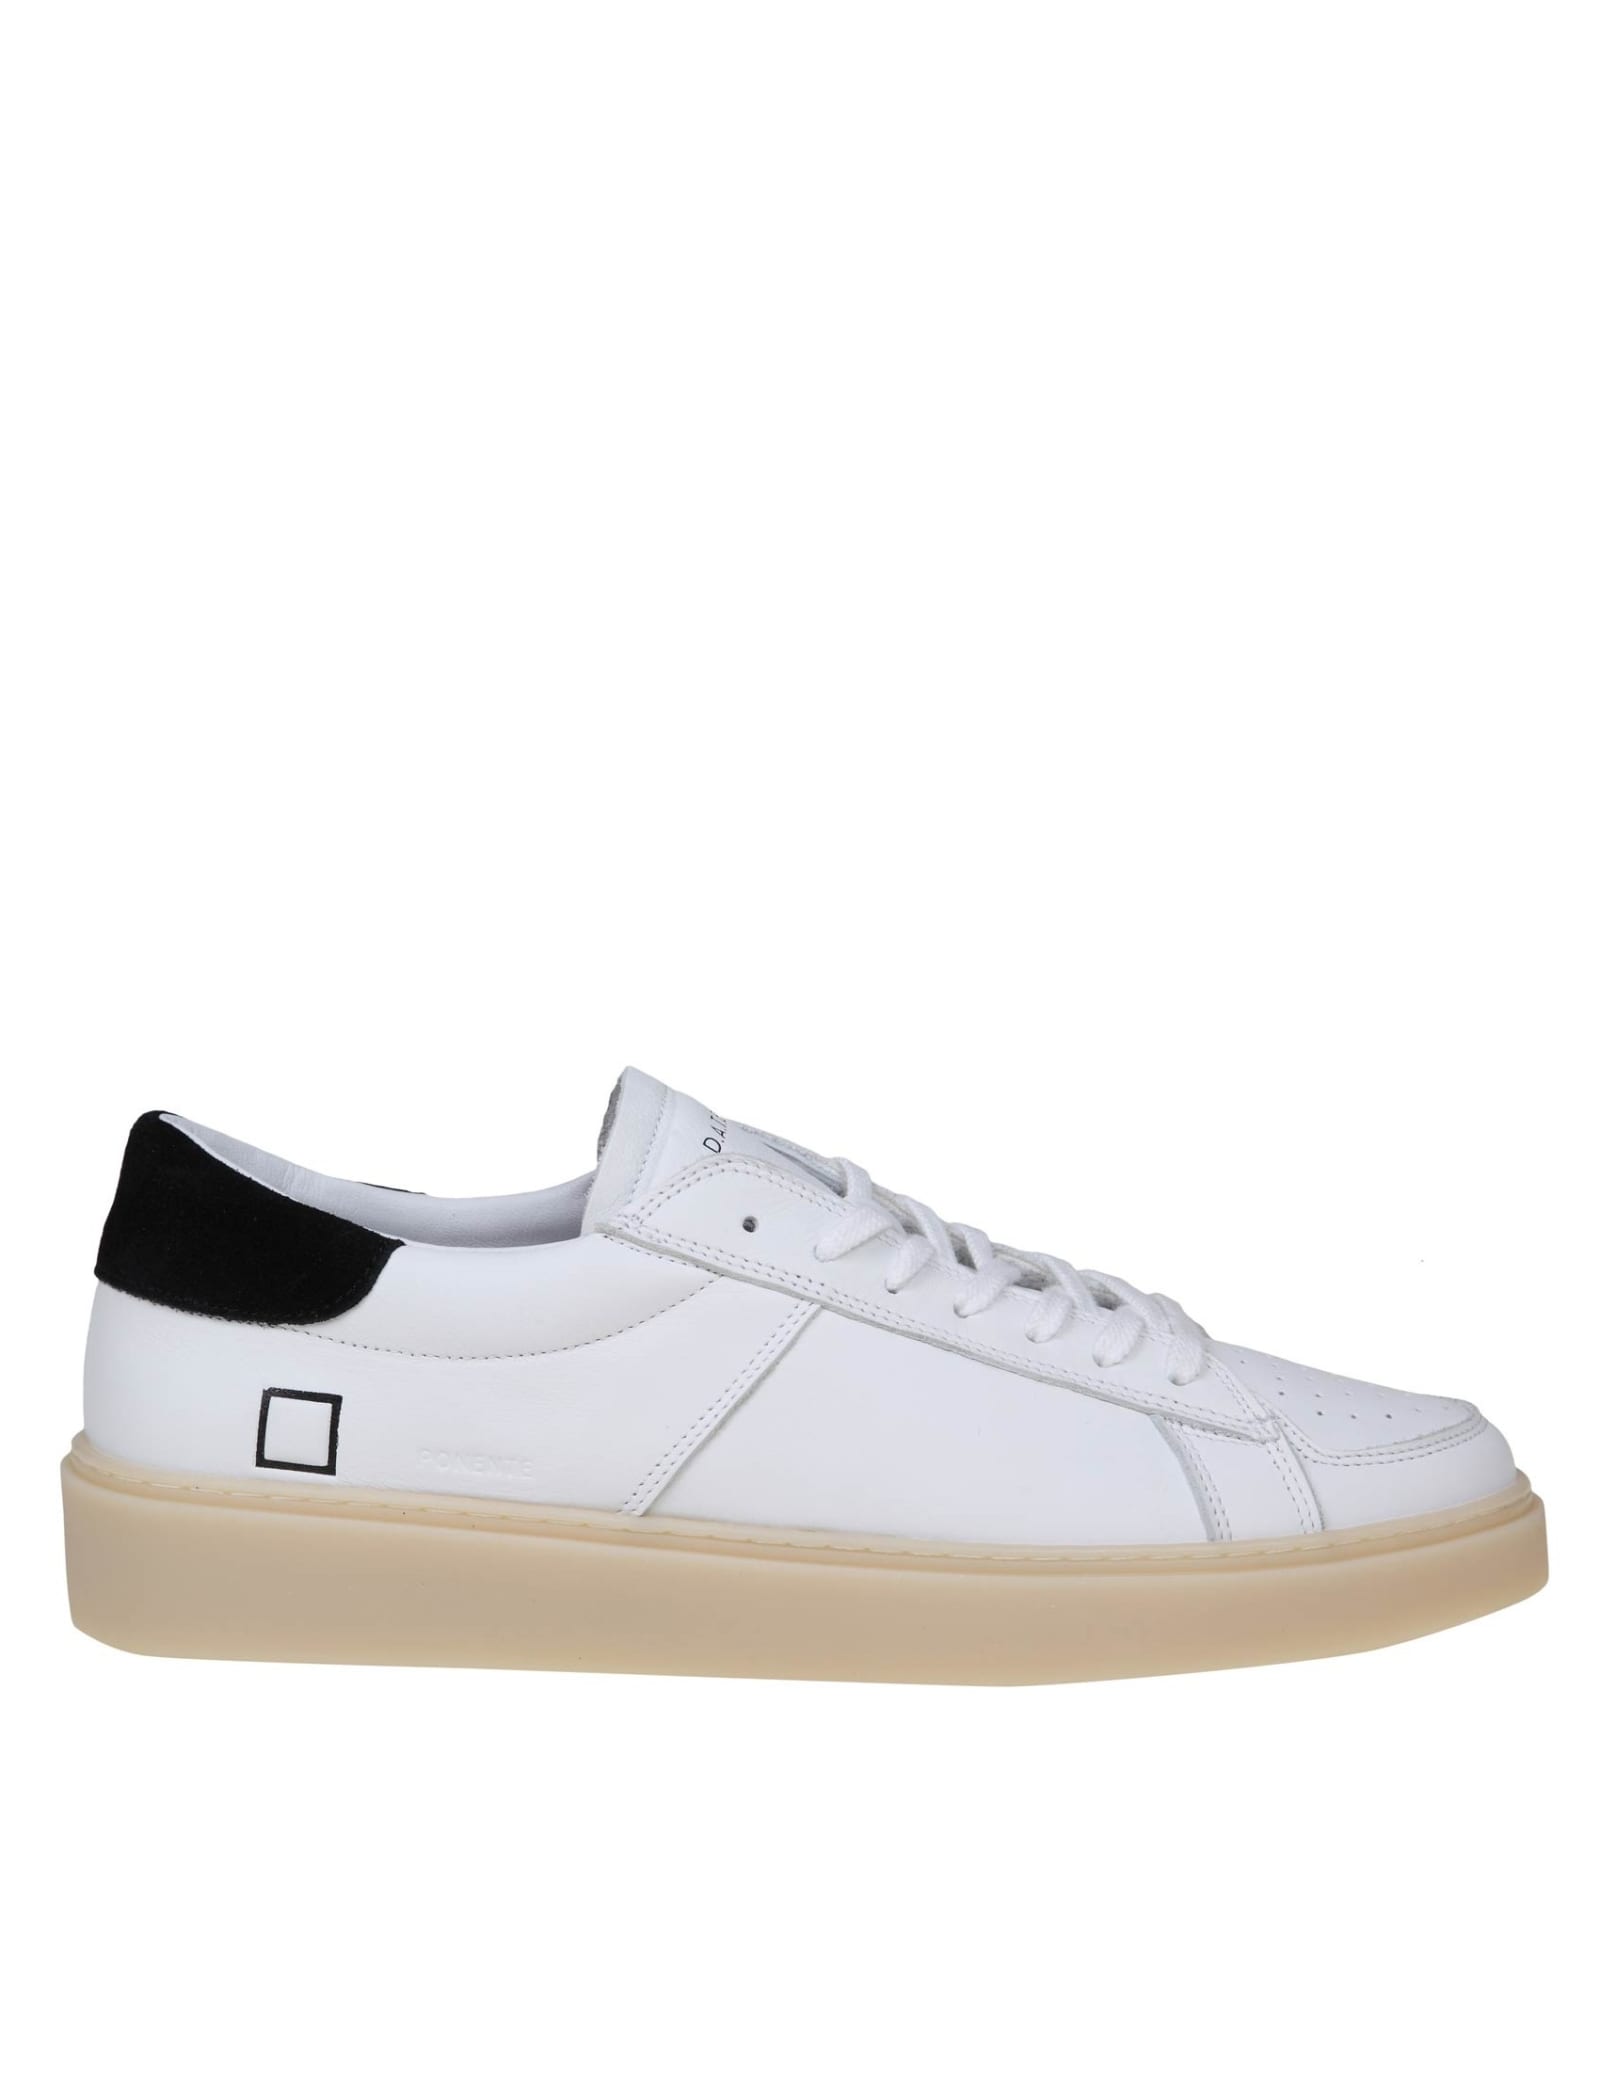 DATE PONENTE SNEAKERS IN BLACK/WHITE LEATHER